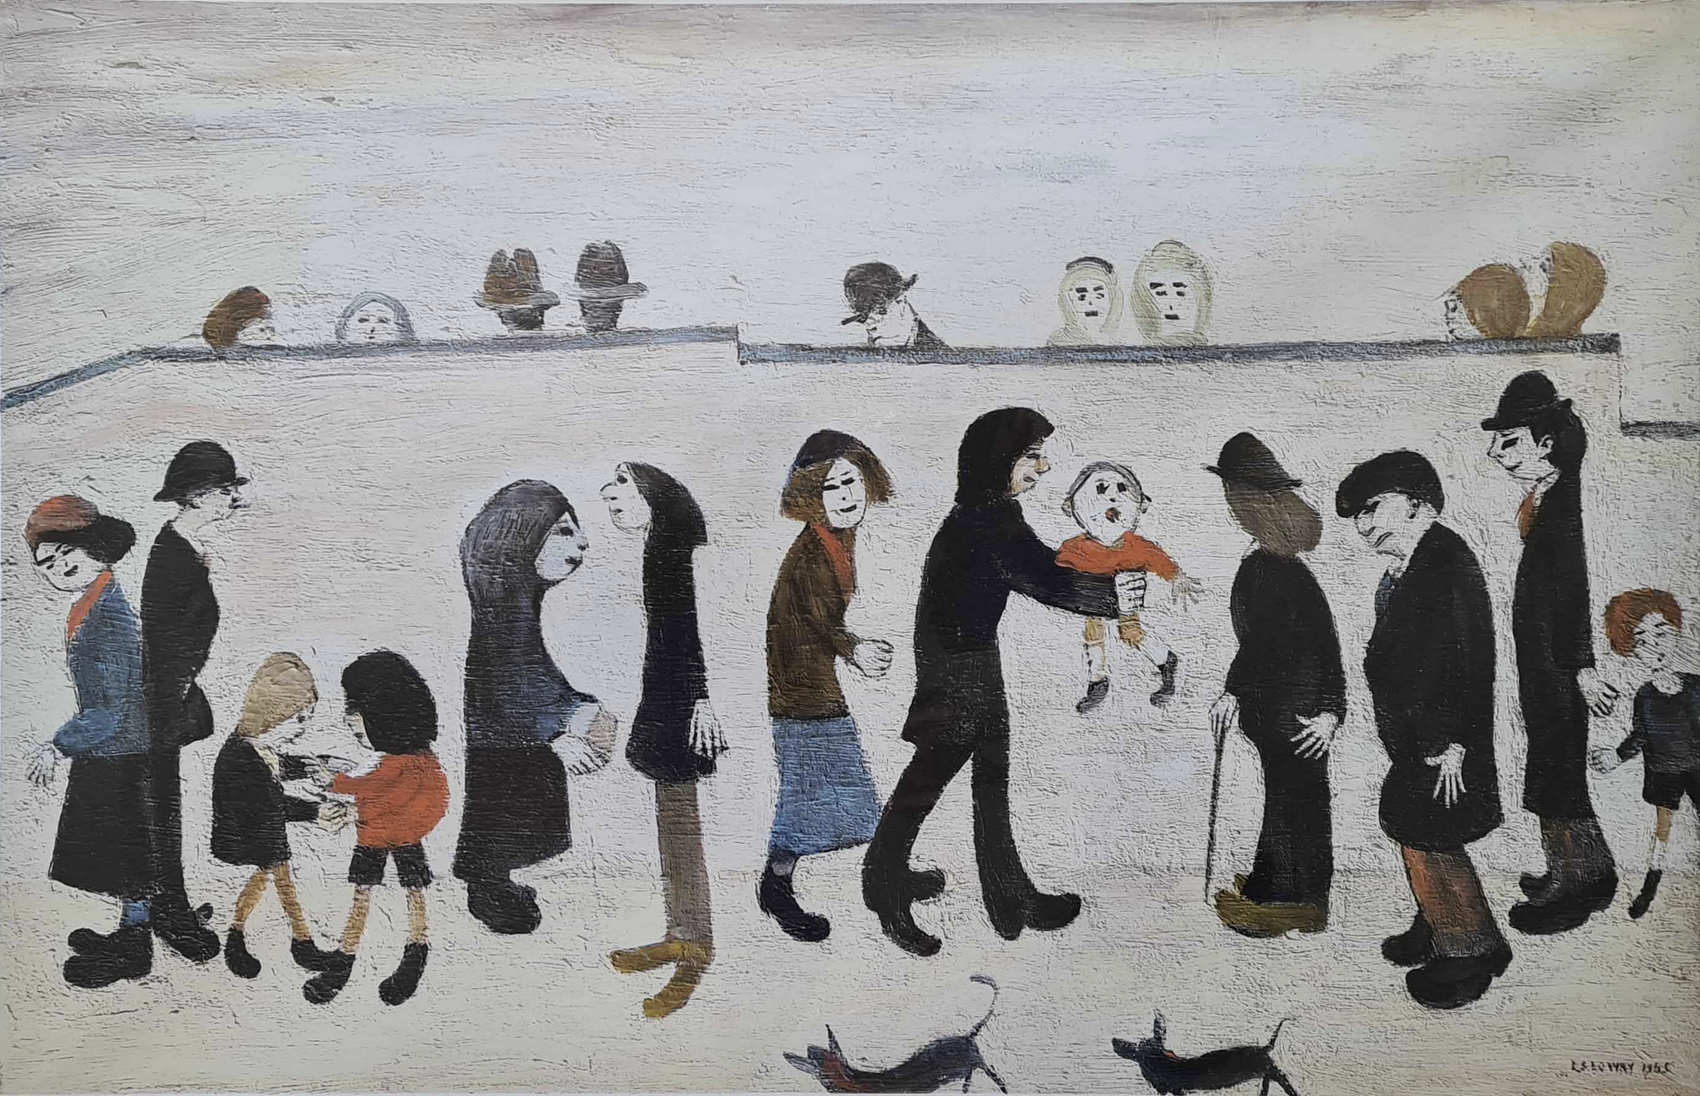 Man Holding Child (1965) by Laurence Stephen Lowry (1887 - 1976), English artist.